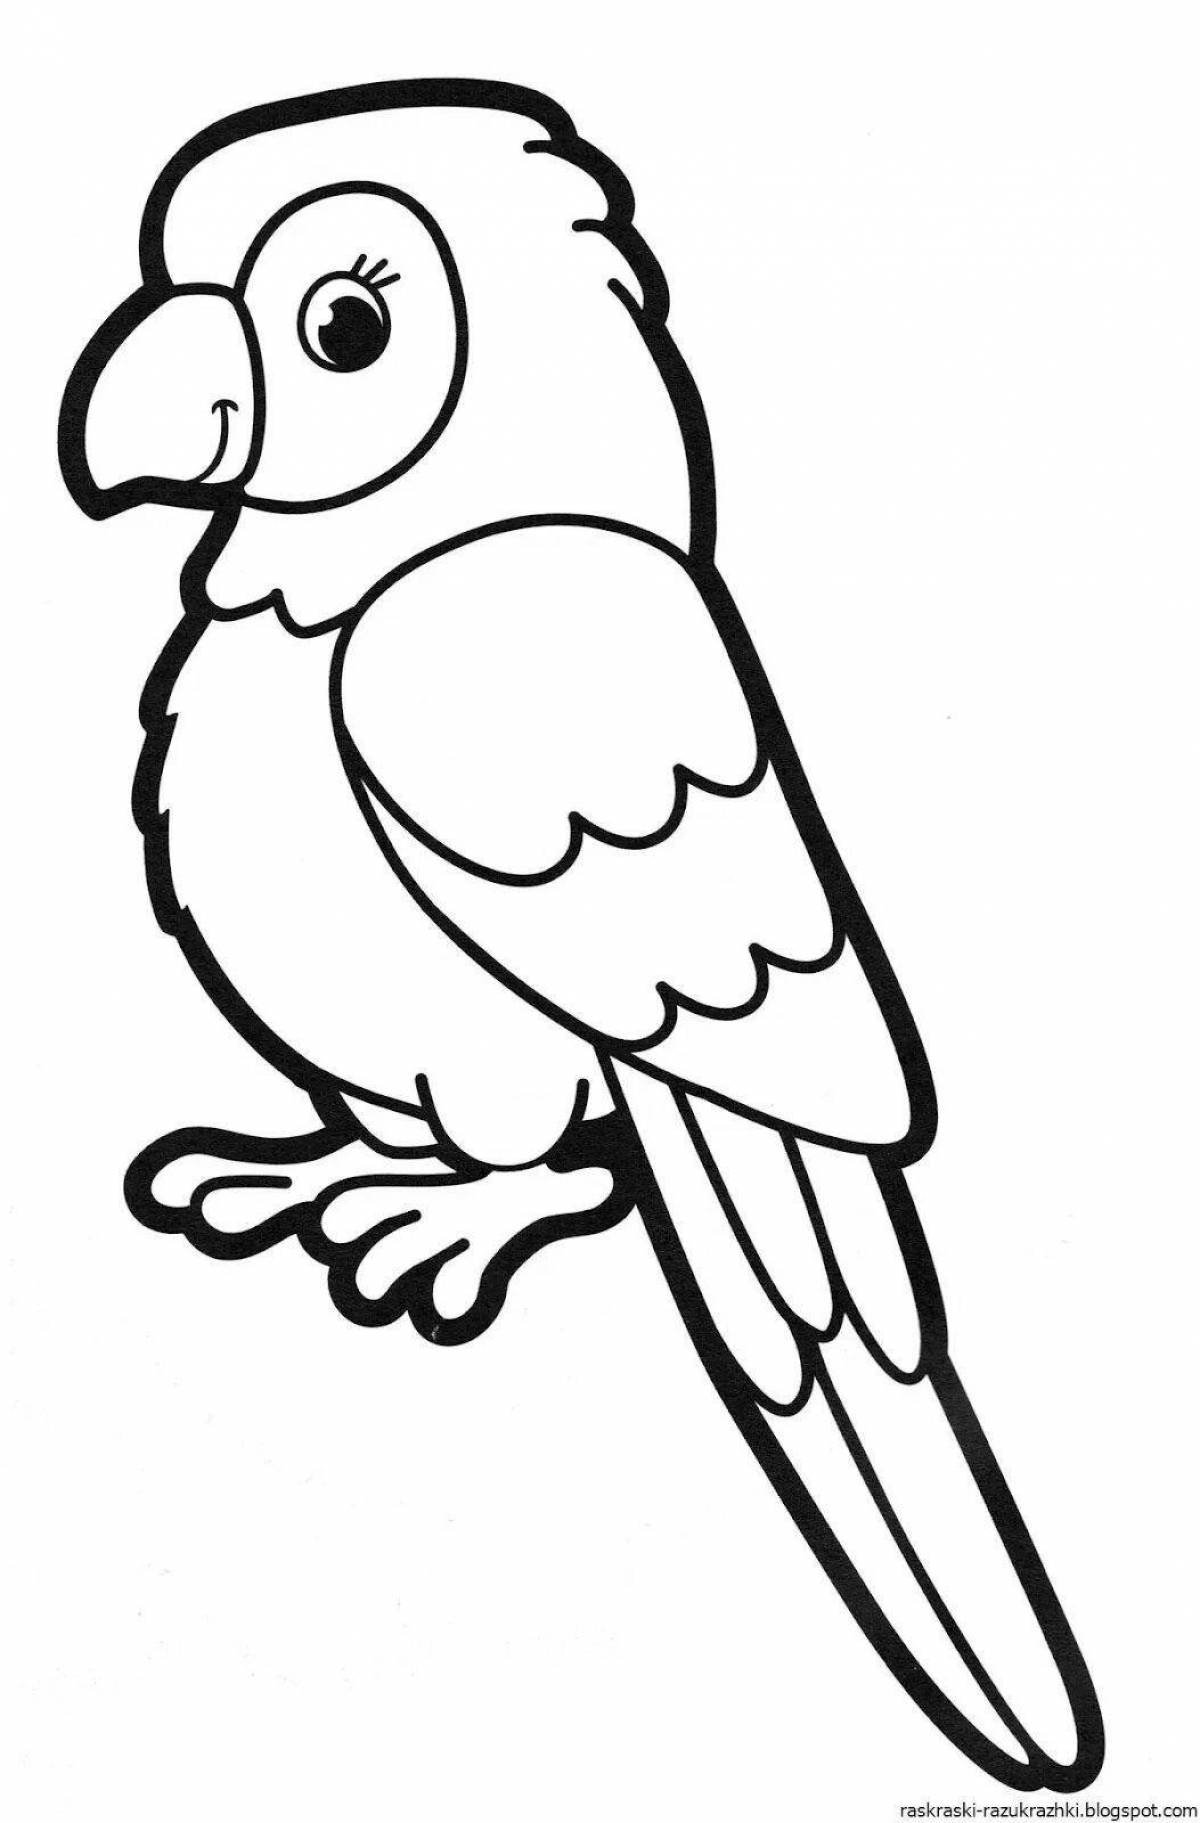 Fun coloring book with birds for 3-4 year olds